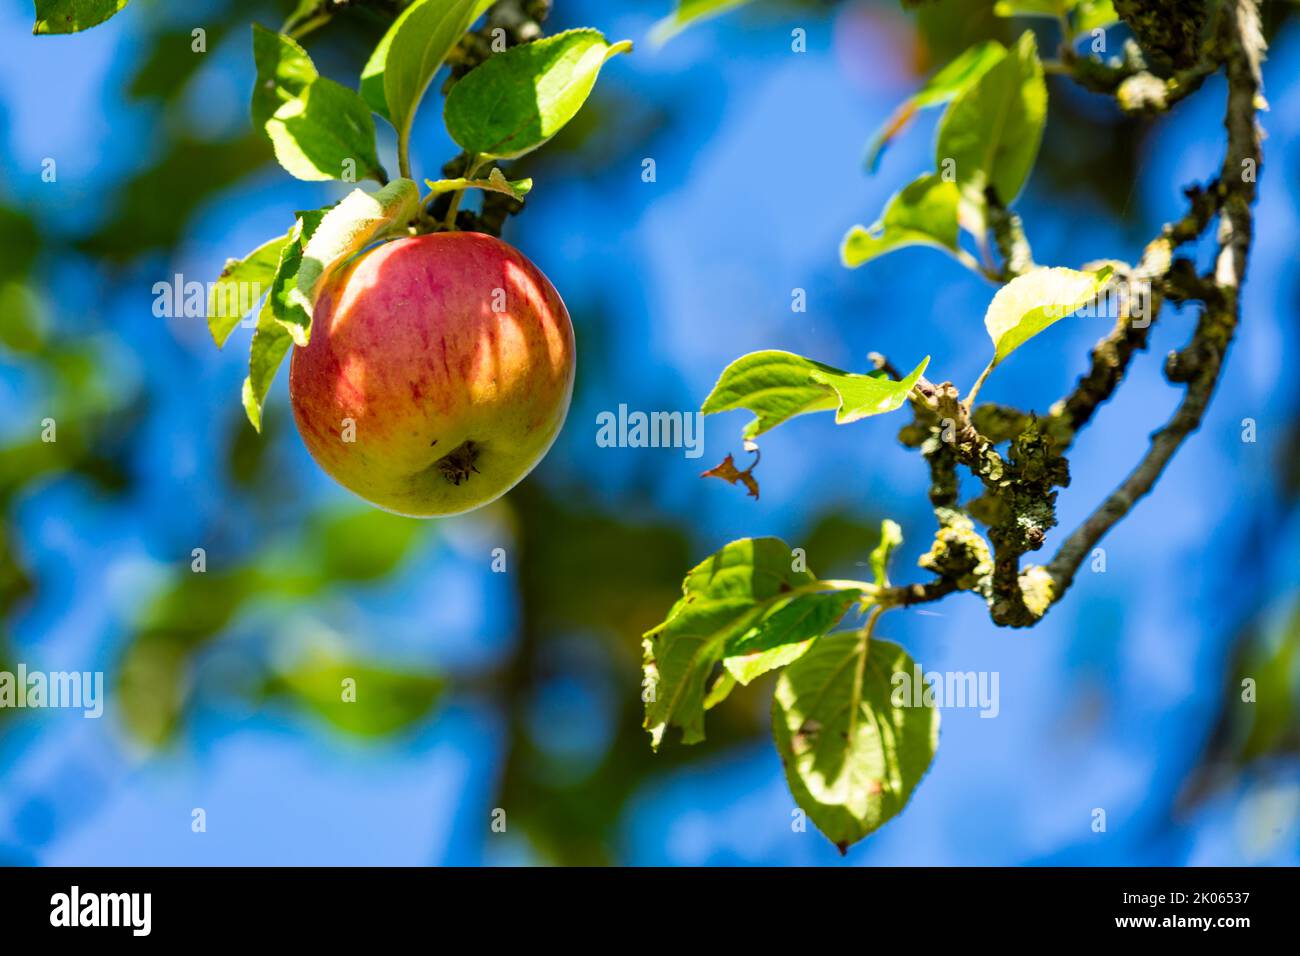 Single King Of the Pippins apple hanging in sundappled shade in an apple tree Stock Photo